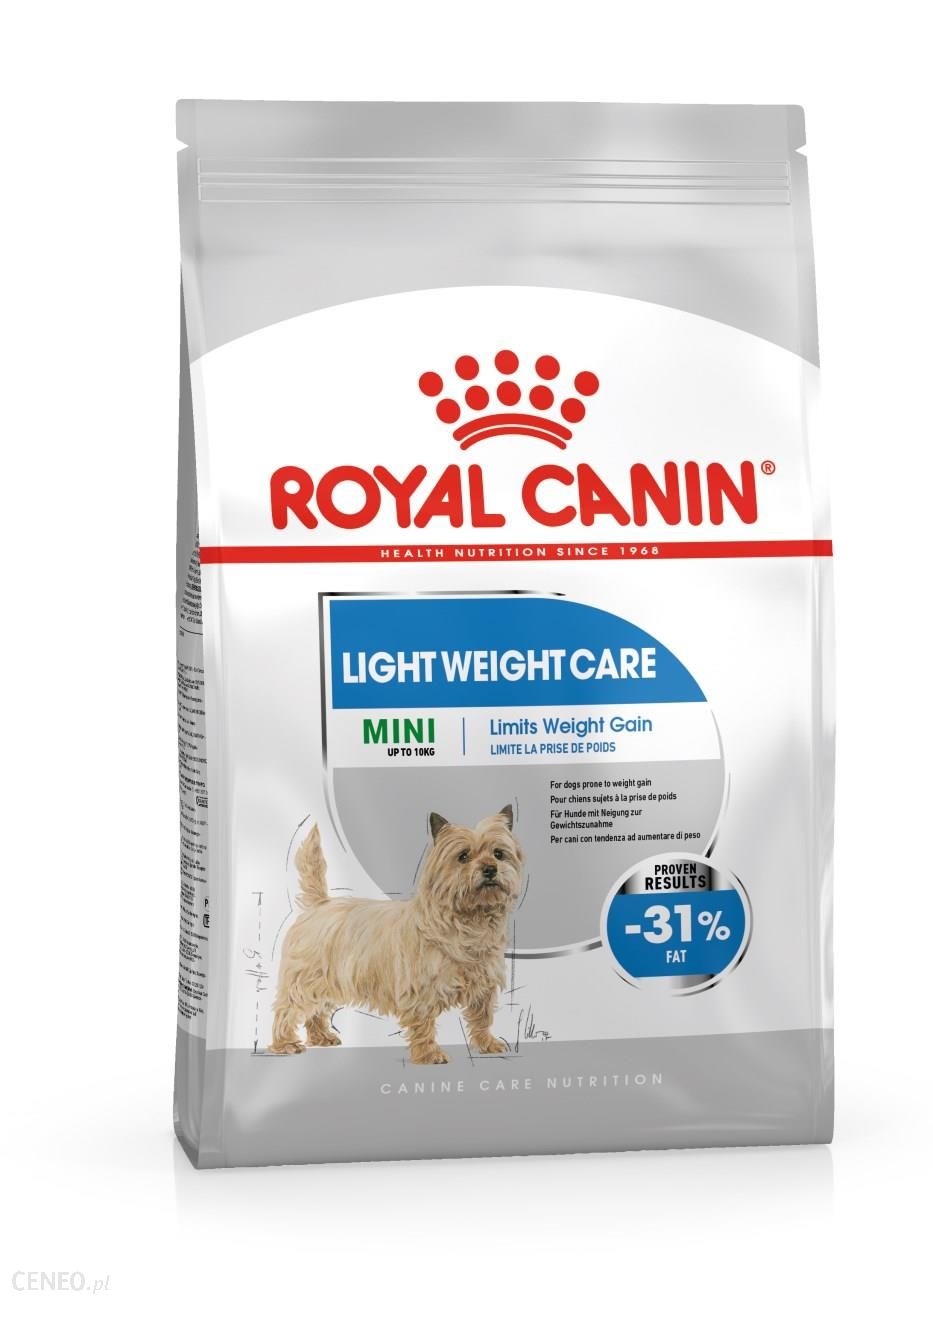 Royal Canin Mini Light Weight Care 4kg